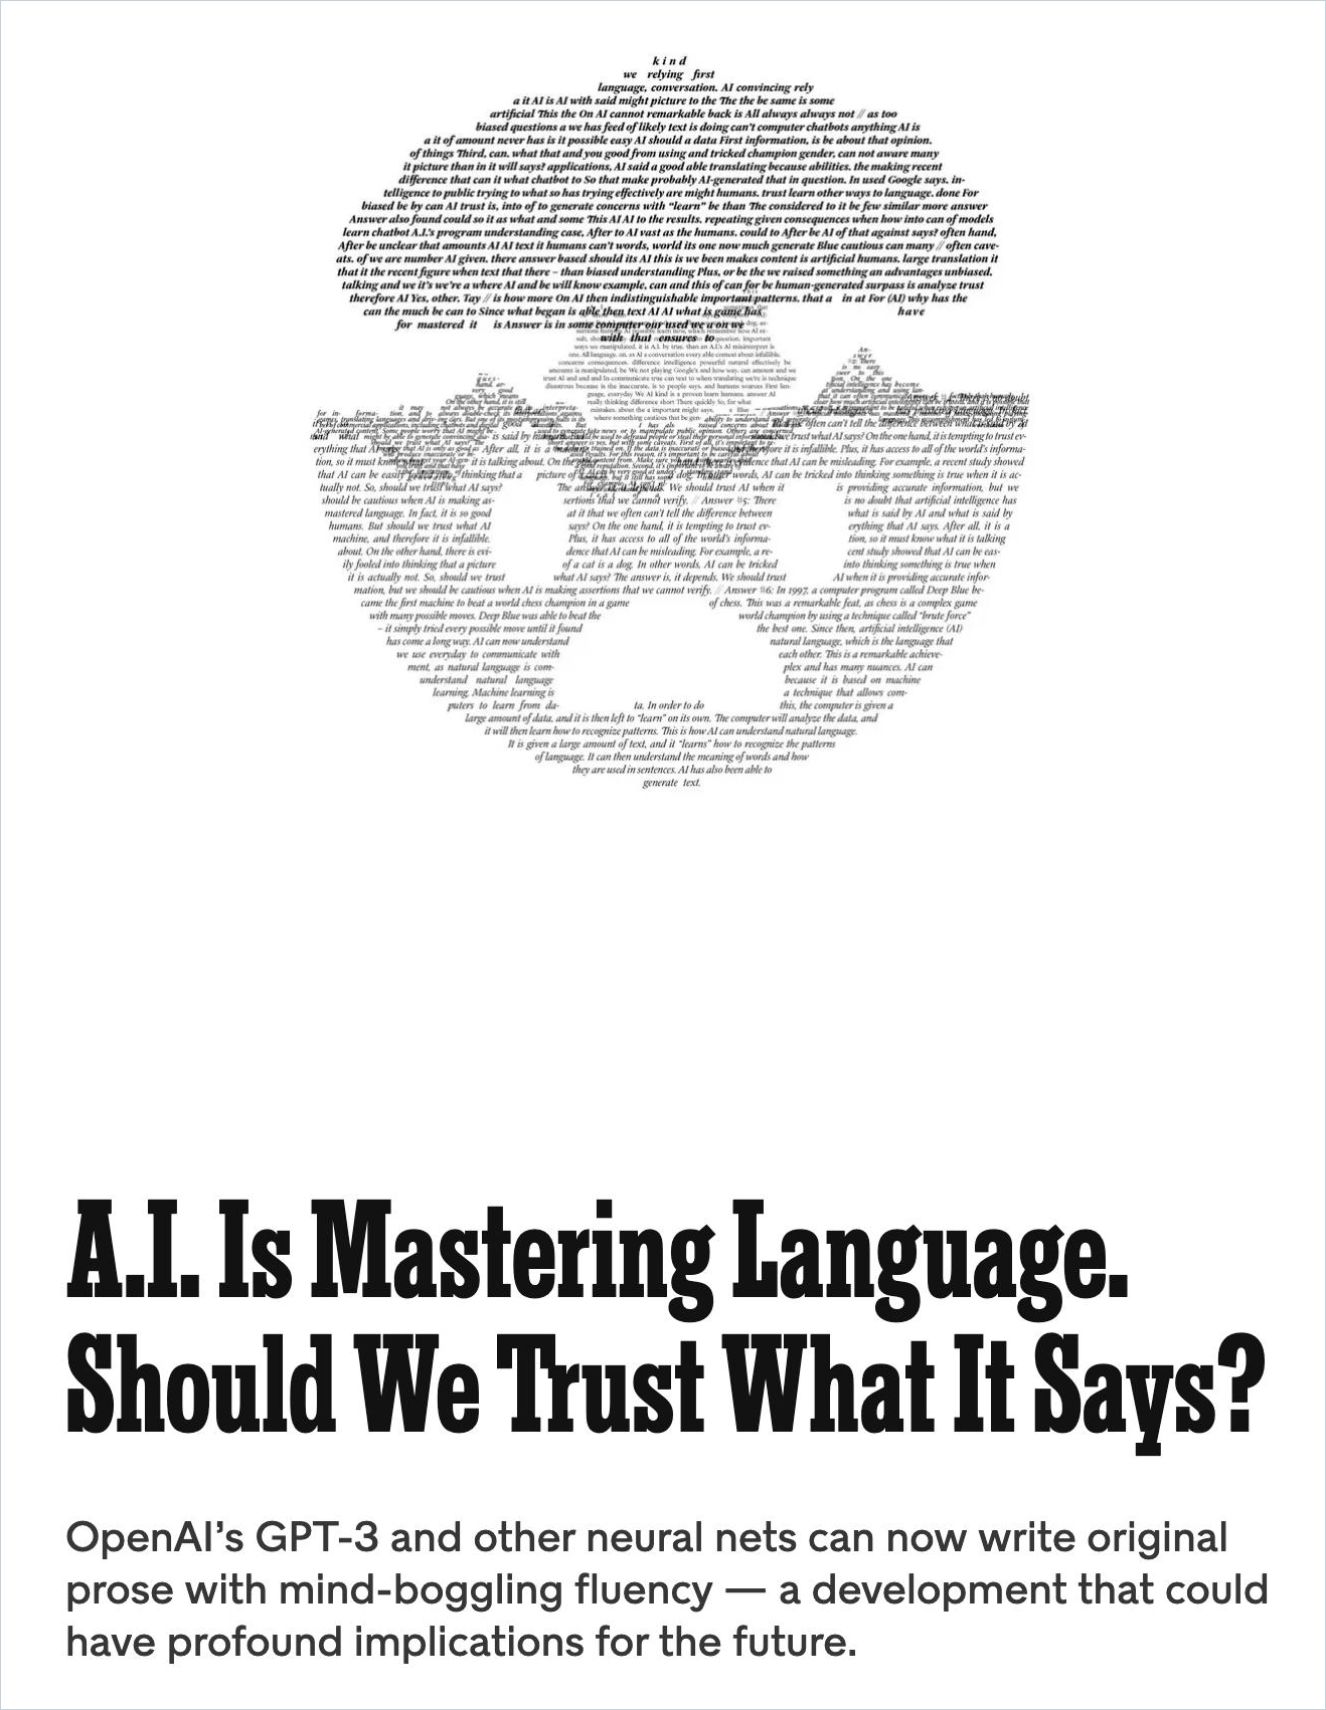 Image of: A.I. Is Mastering Language. Should We Trust What It Says?